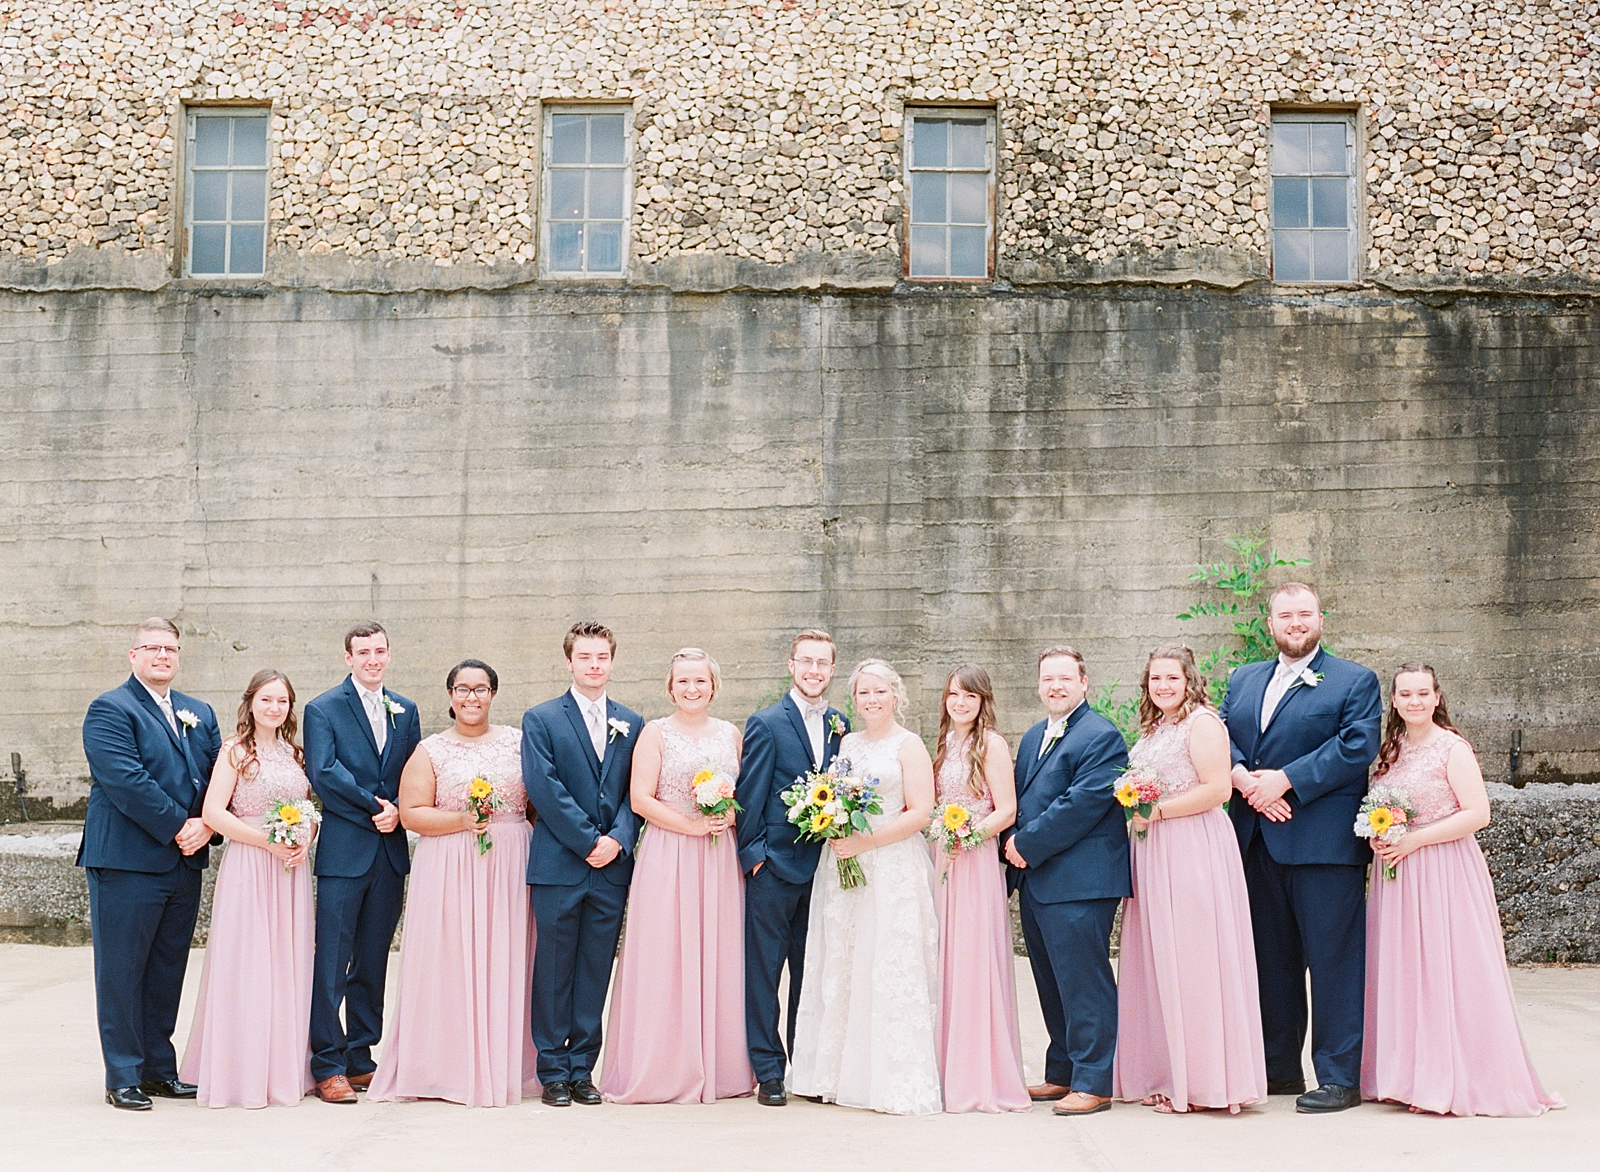 Black Fox Farms Garden Wedding Bride and Groom with Bridal Party in Front of Old Building Photo